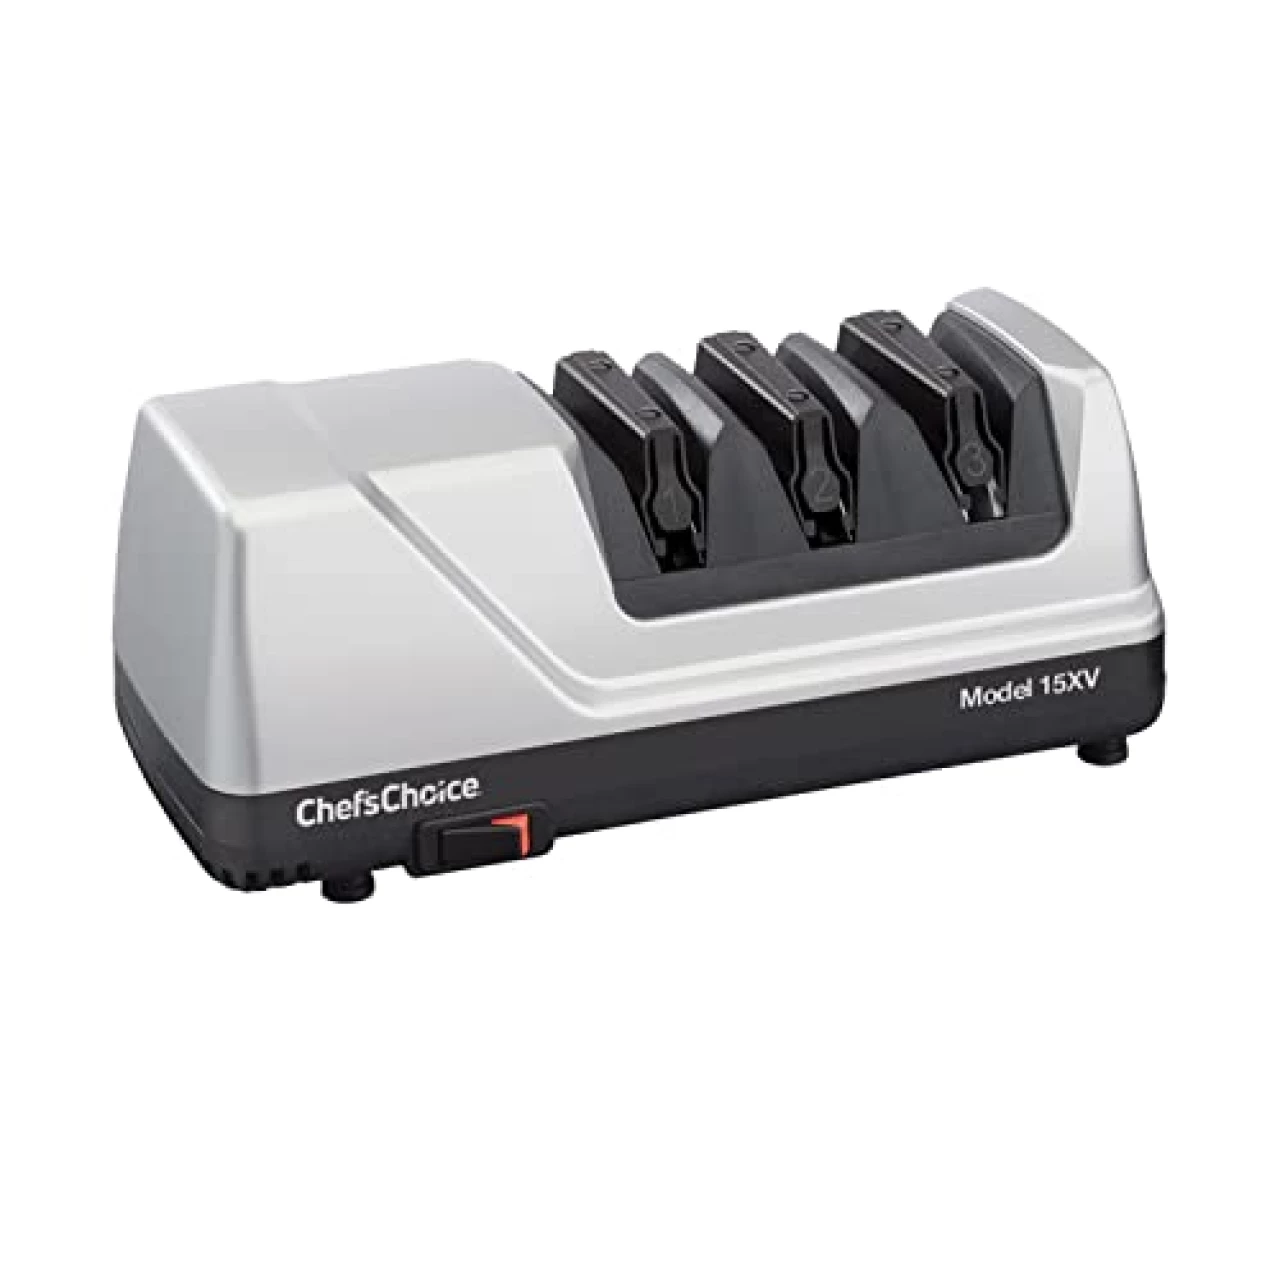 Chef’sChoice 15XV Professional Electric Knife Sharpener